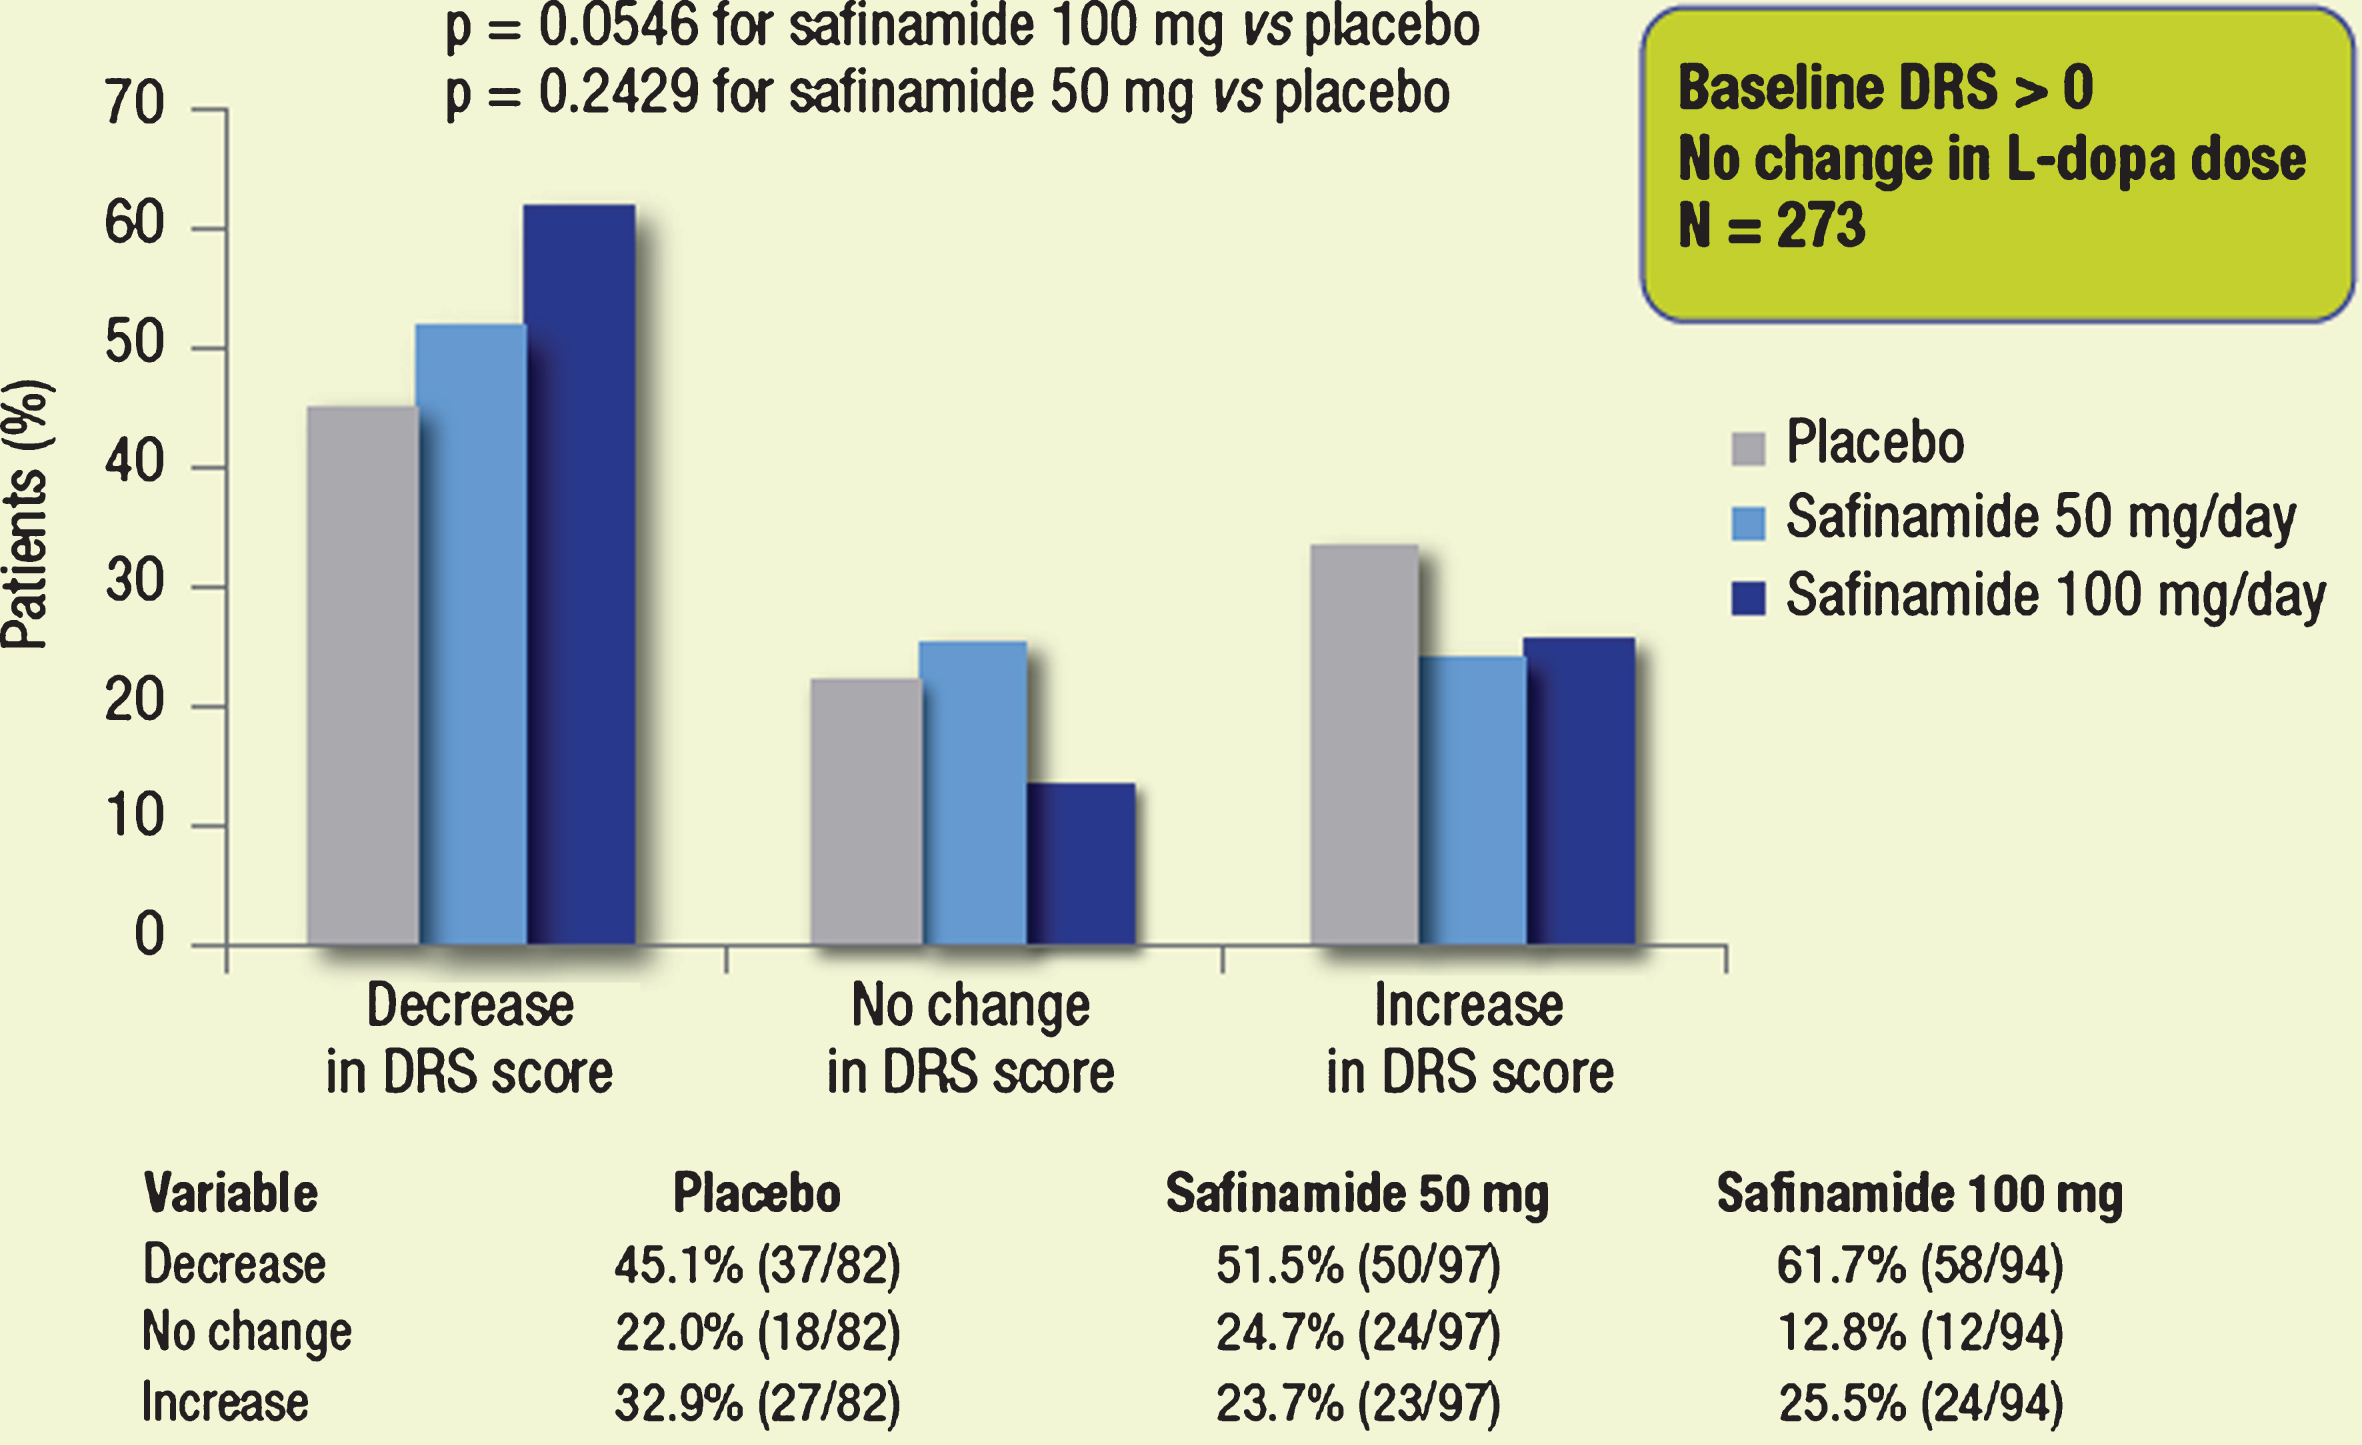 Proportions of patients with different categorical changes in DRS score (decrease, no change, increase). Subgroups of patients with dyskinesia at baseline, whose dose of L-dopa was not changed throughout the study.